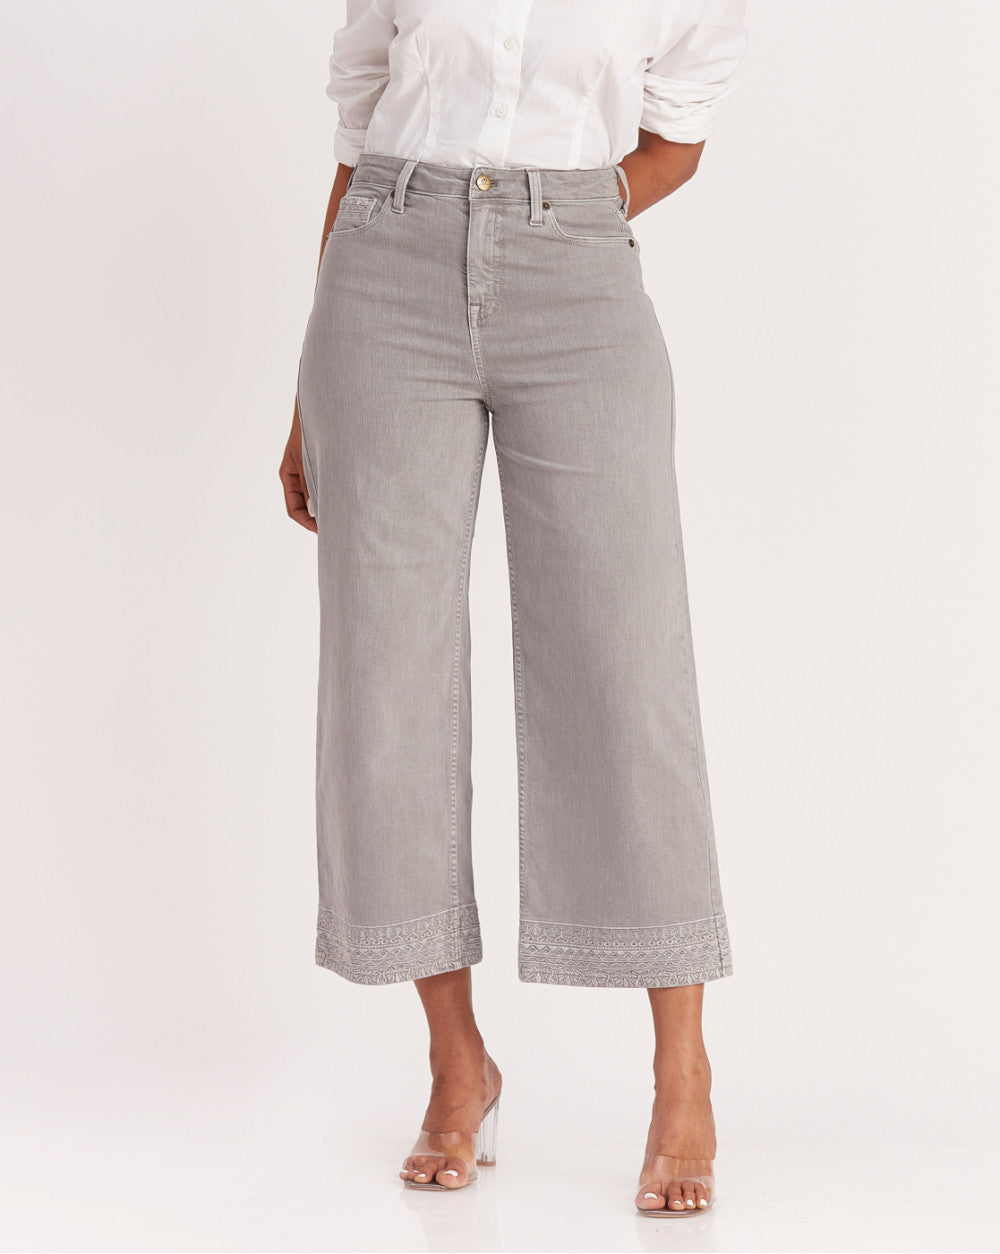 Wide Leg High Waist Boho Embroidered Colored Jeans - Soft Grey